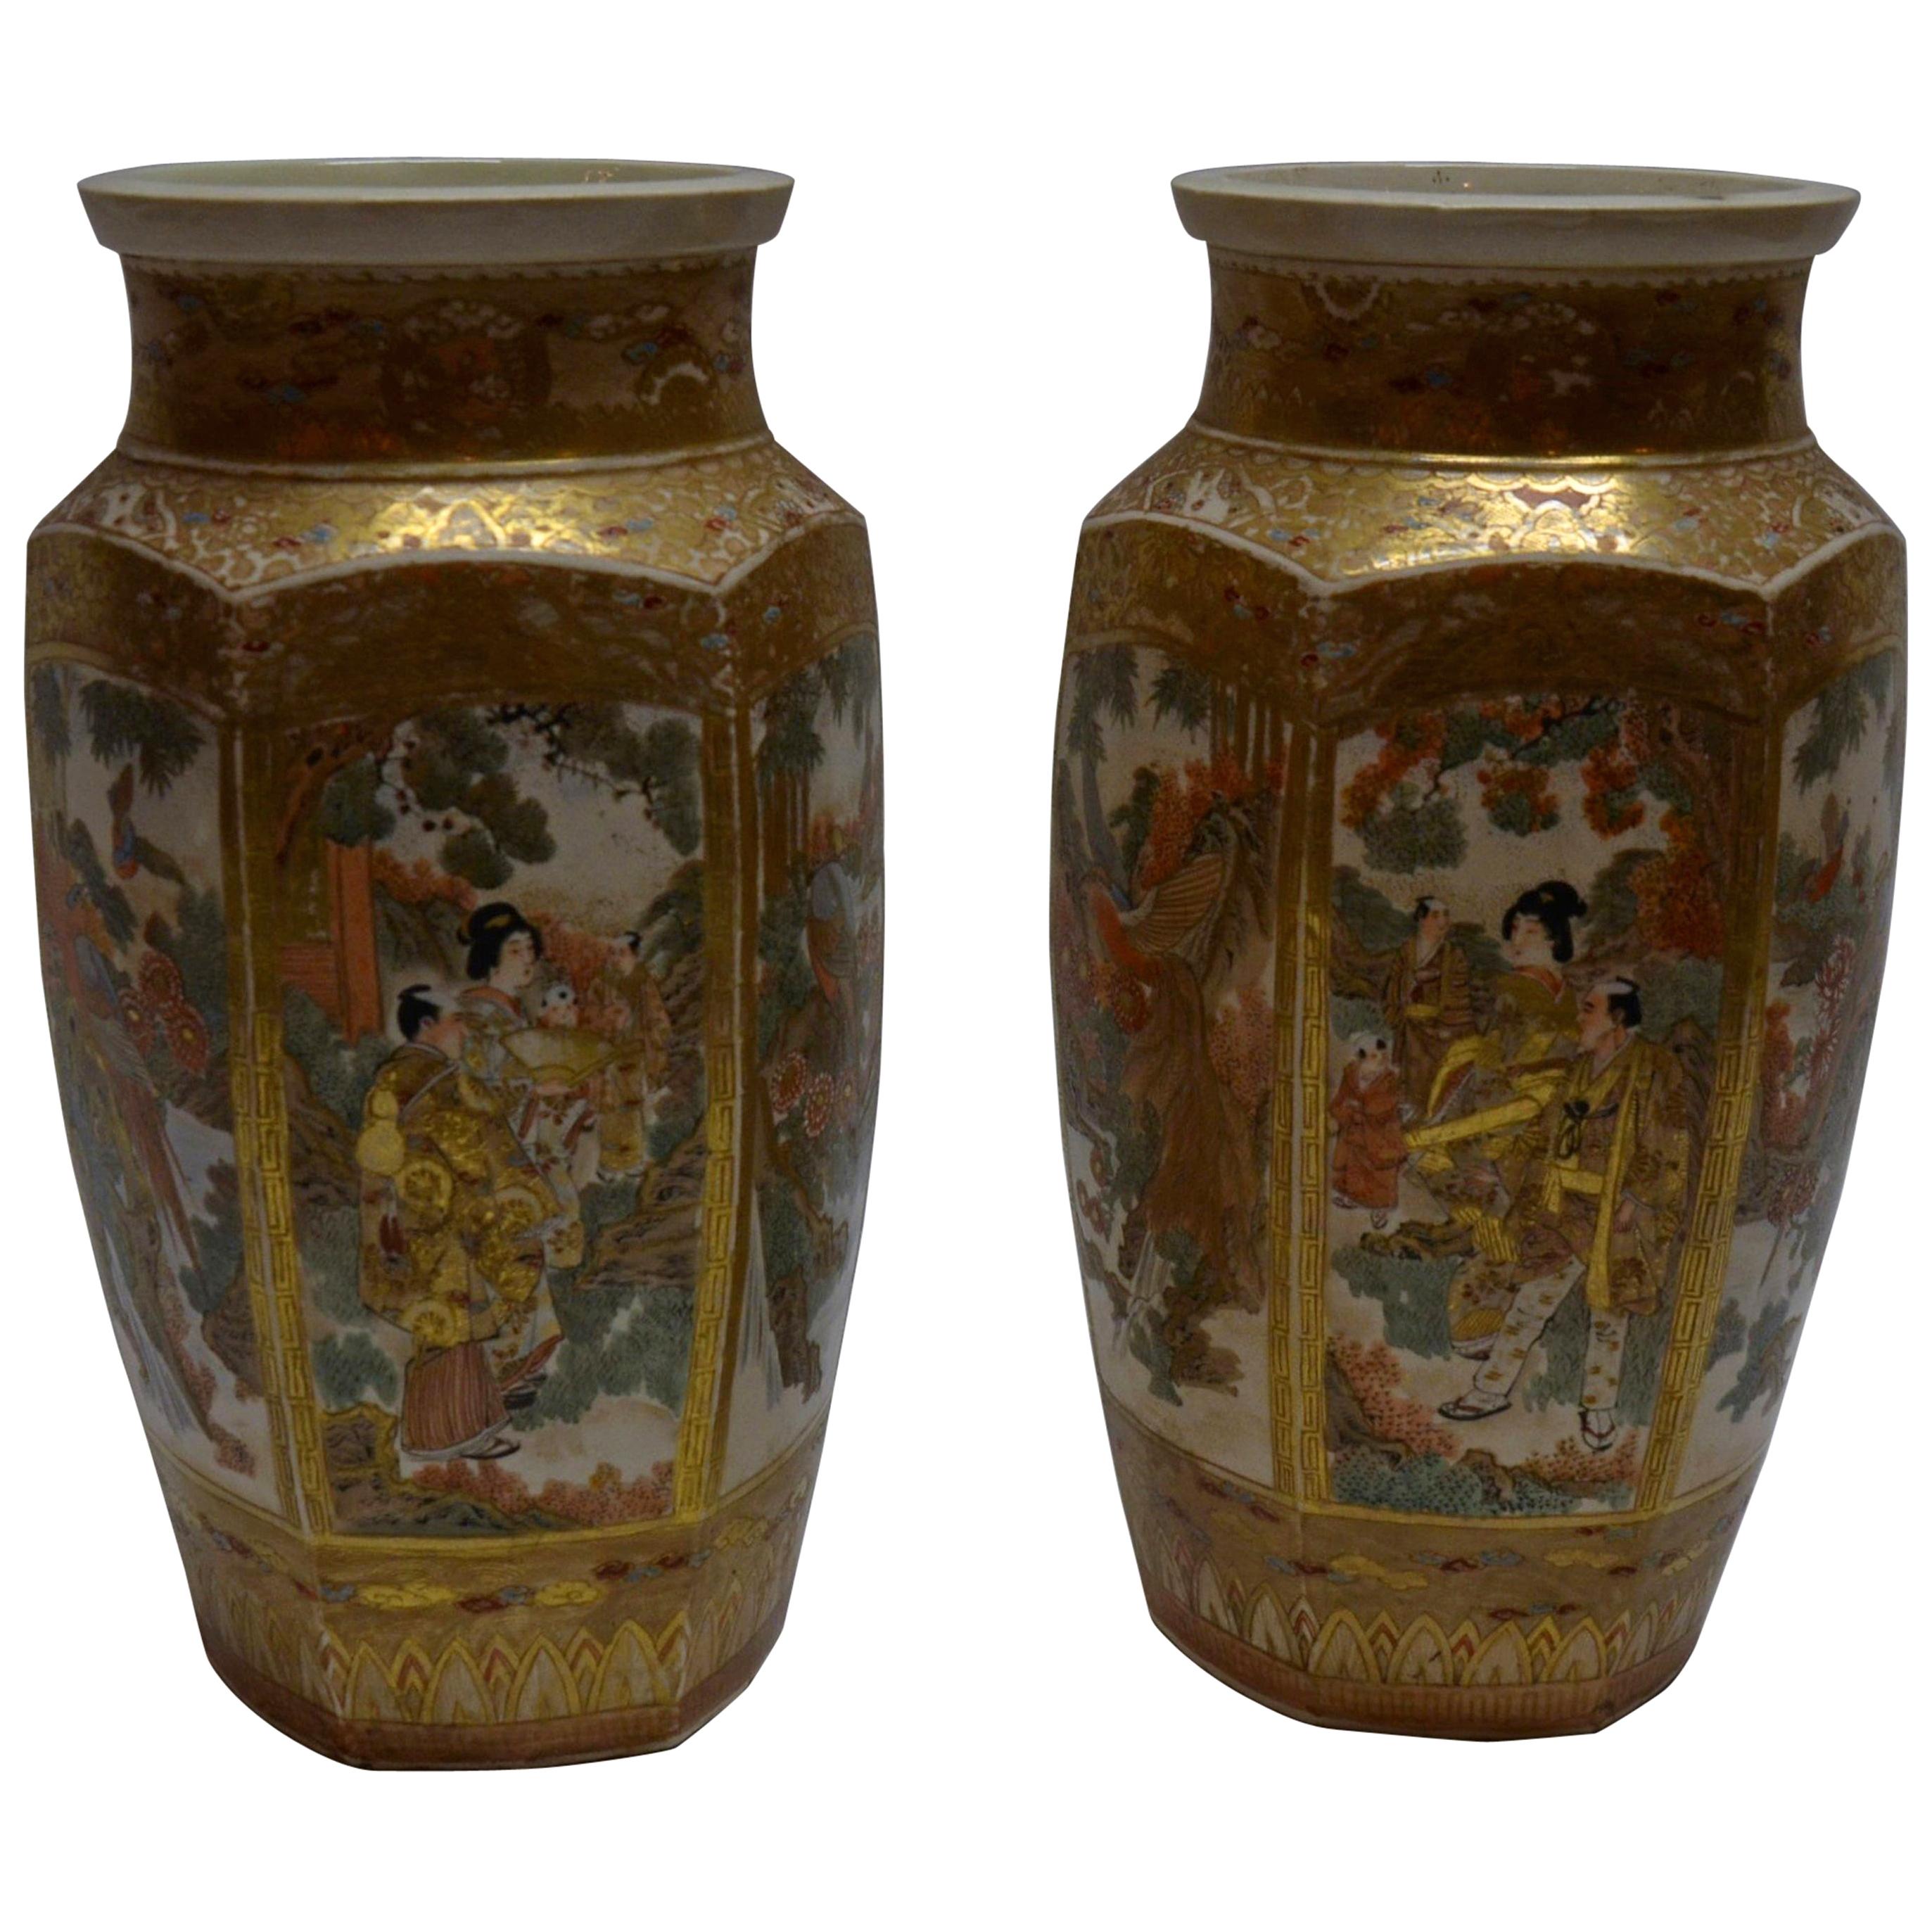 Pair of Japanese Gold and Multicolored Satsuma Porcelain Vases, circa 1890